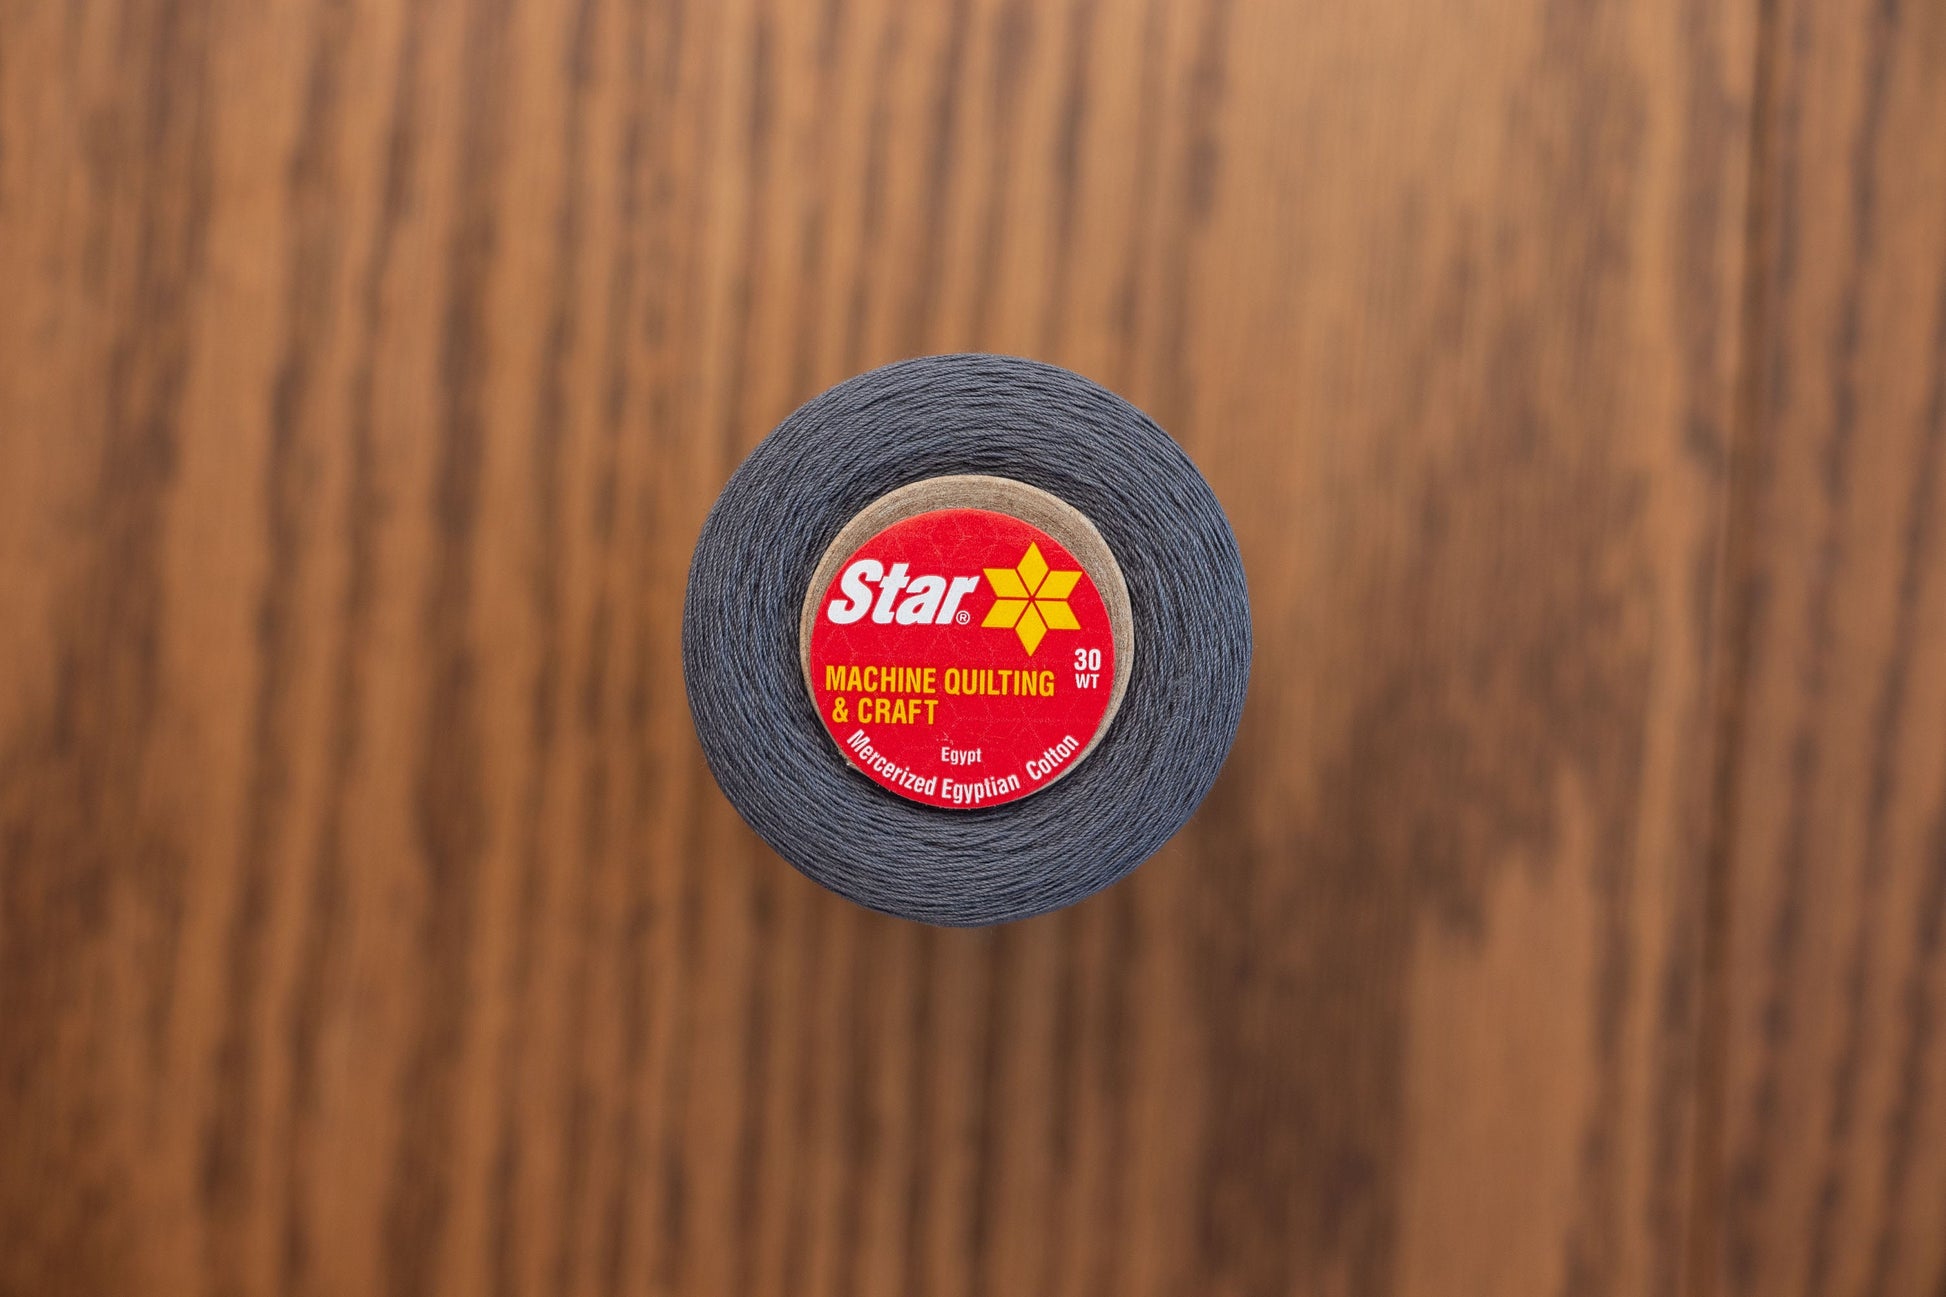 Star Coats and Clark Cotton Thread for Sewing, Machine Quilting & Crafting  Nugrey V34 23A 